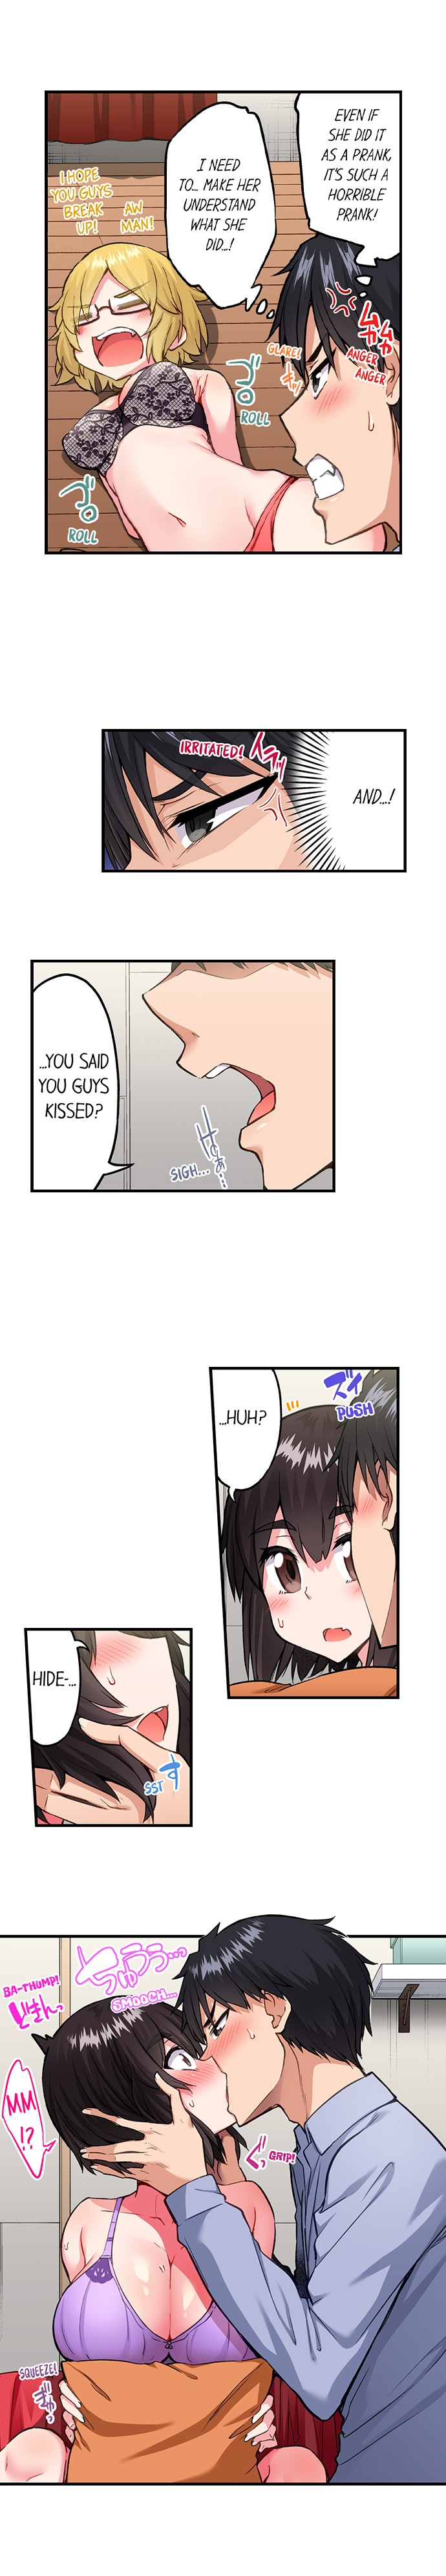 Traditional Job of Washing Girls’ Body Chapter 197 - Page 7